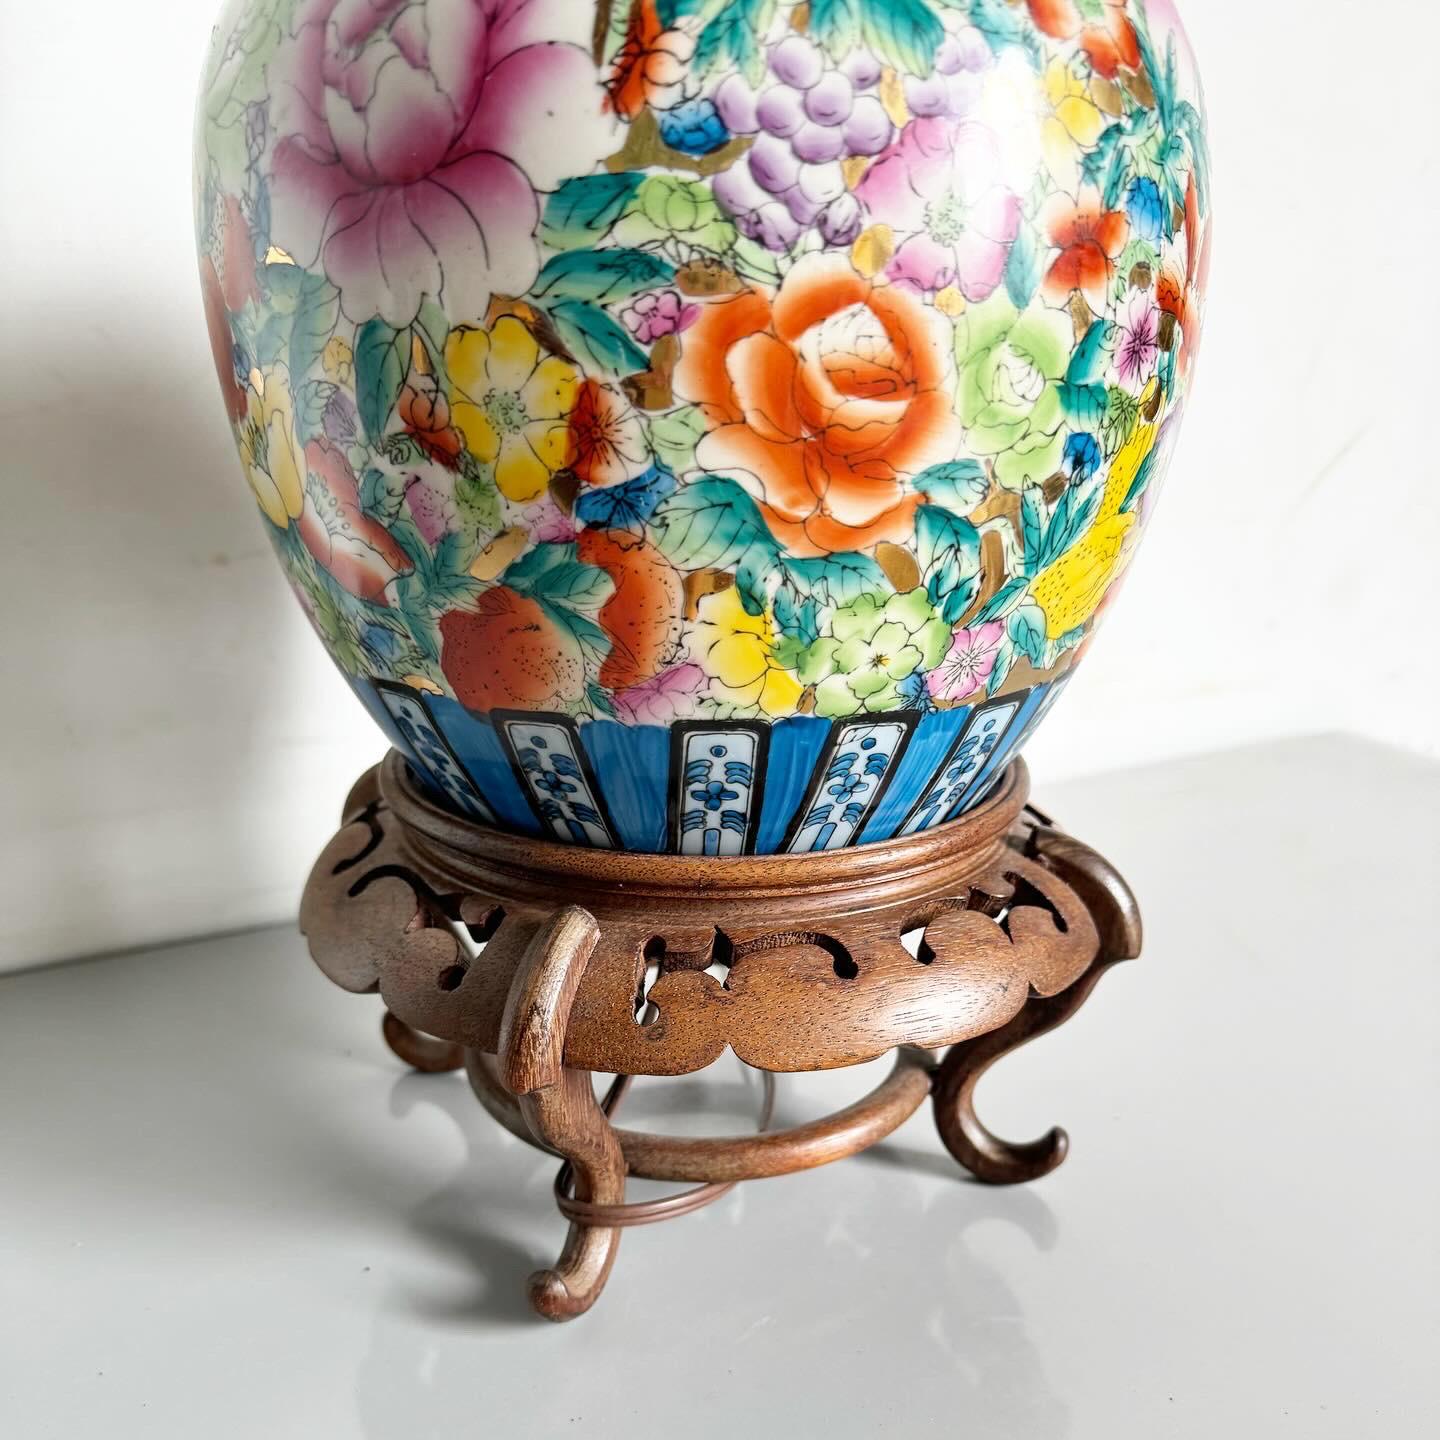 Illuminate your home with the cultural beauty of the Chinese Hand Painted Pagoda Table Lamp. This exquisite lamp features a hand-painted pagoda design, rich in detail and vibrant colors, atop a hand-carved wooden base. Its blend of traditional